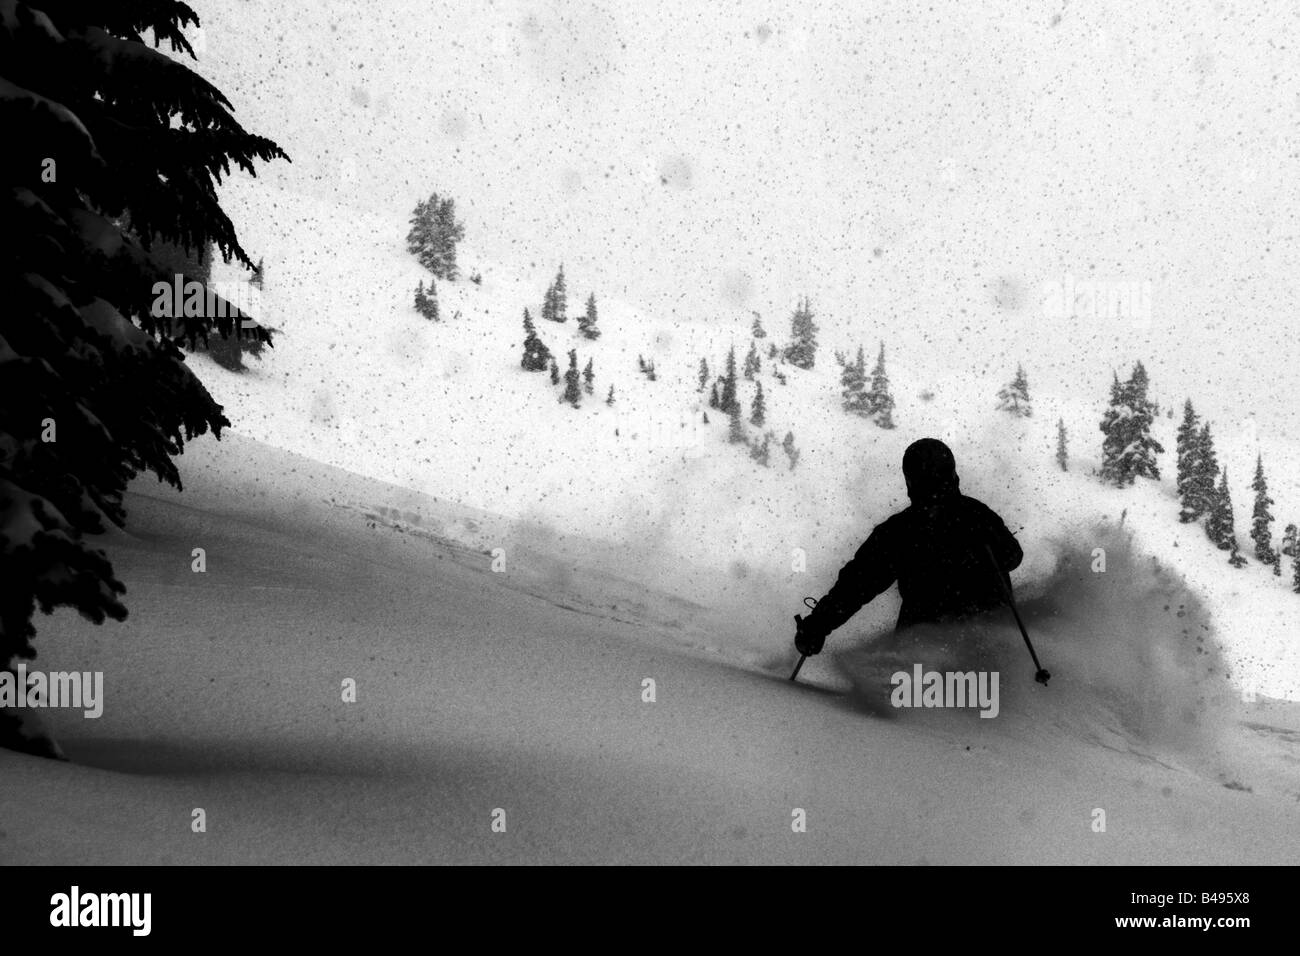 A silhouetted man skiing in deep poder snow during a snow storm Stock Photo